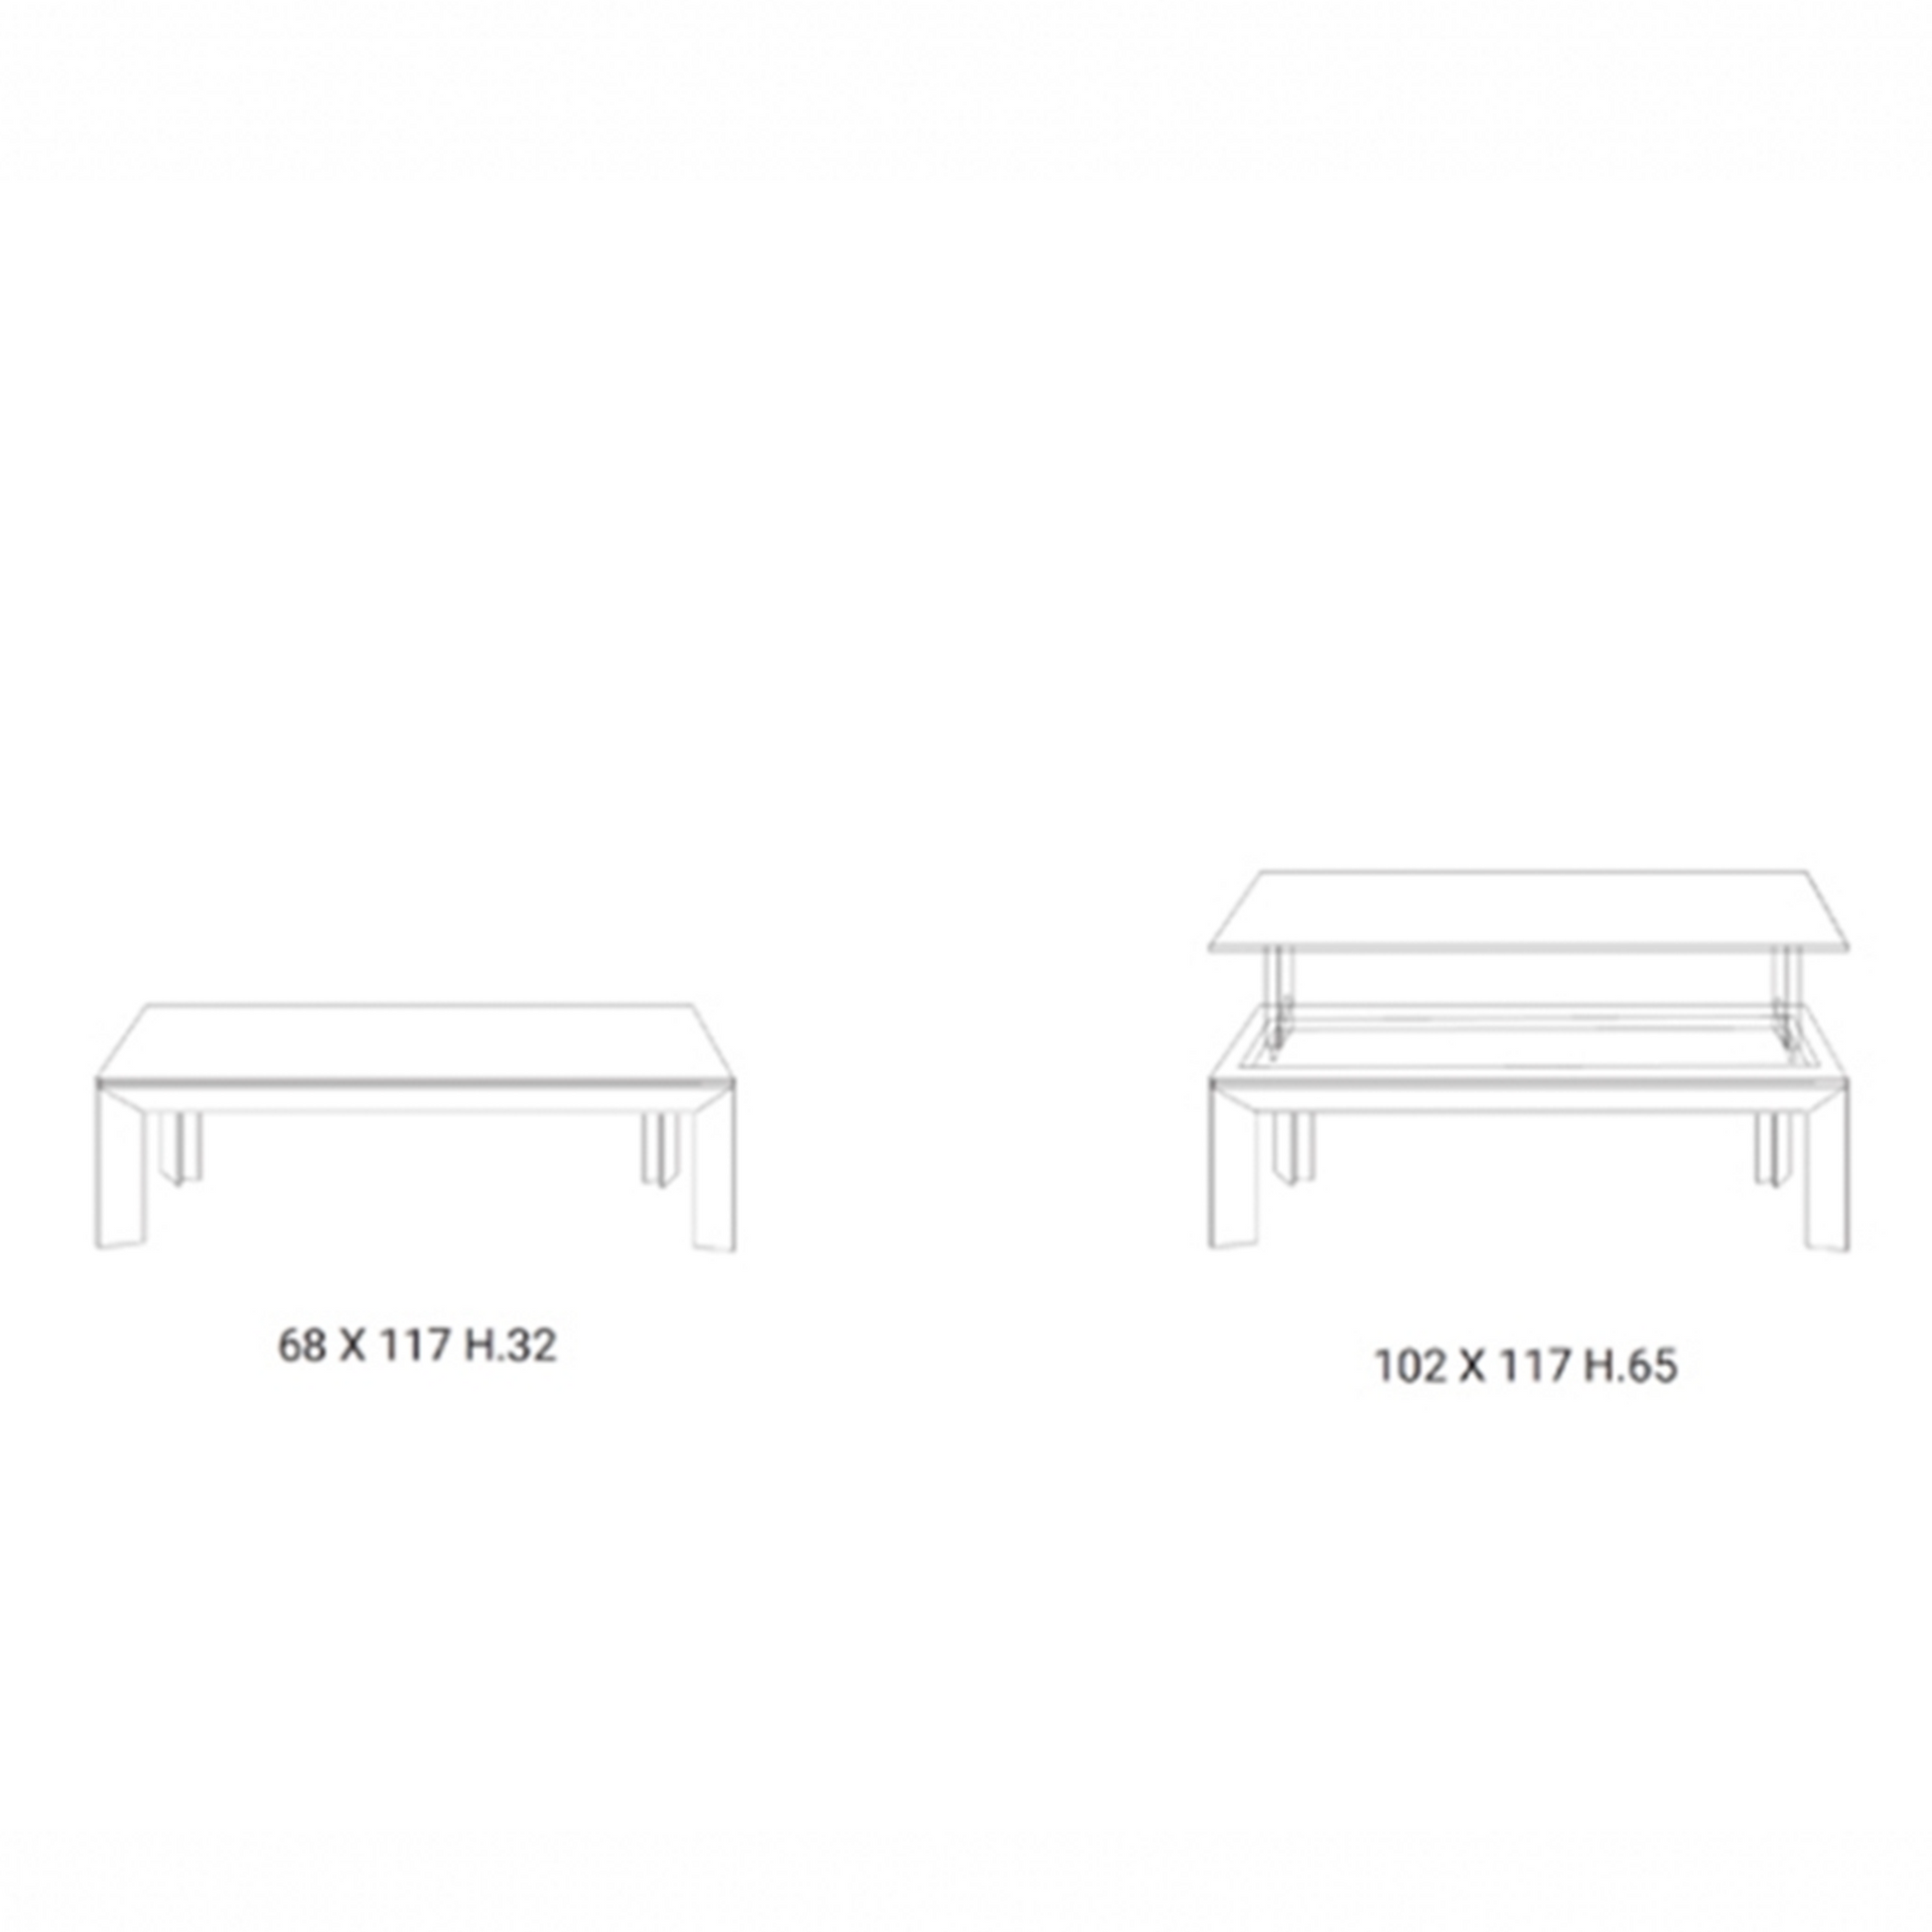 Metrino coffee table technical drawing with dimensions.